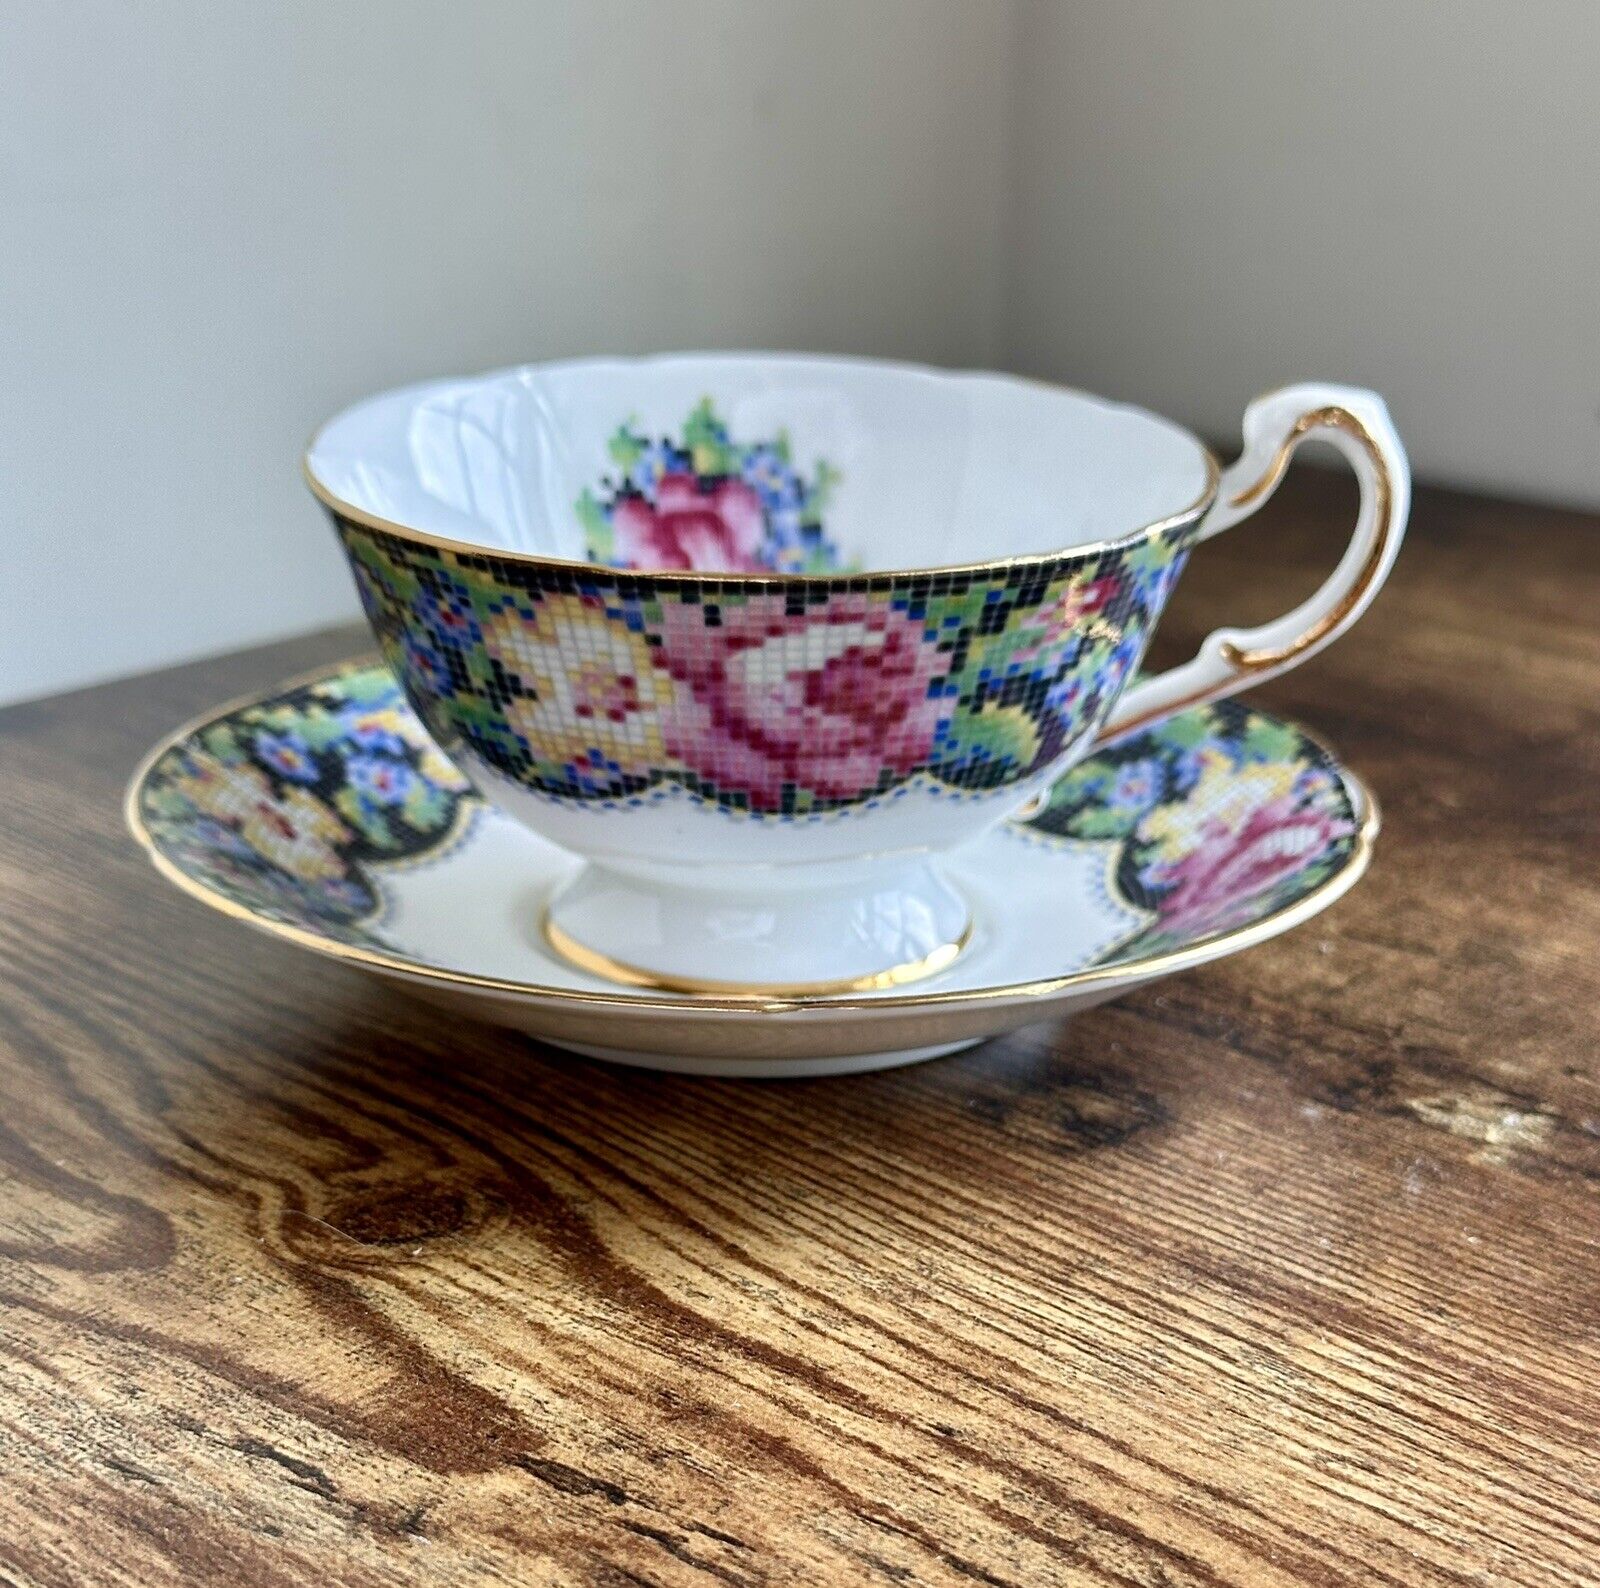 Vintage Paragon Teacup and Saucer - Gingham Rose Needlepoint Chintz China